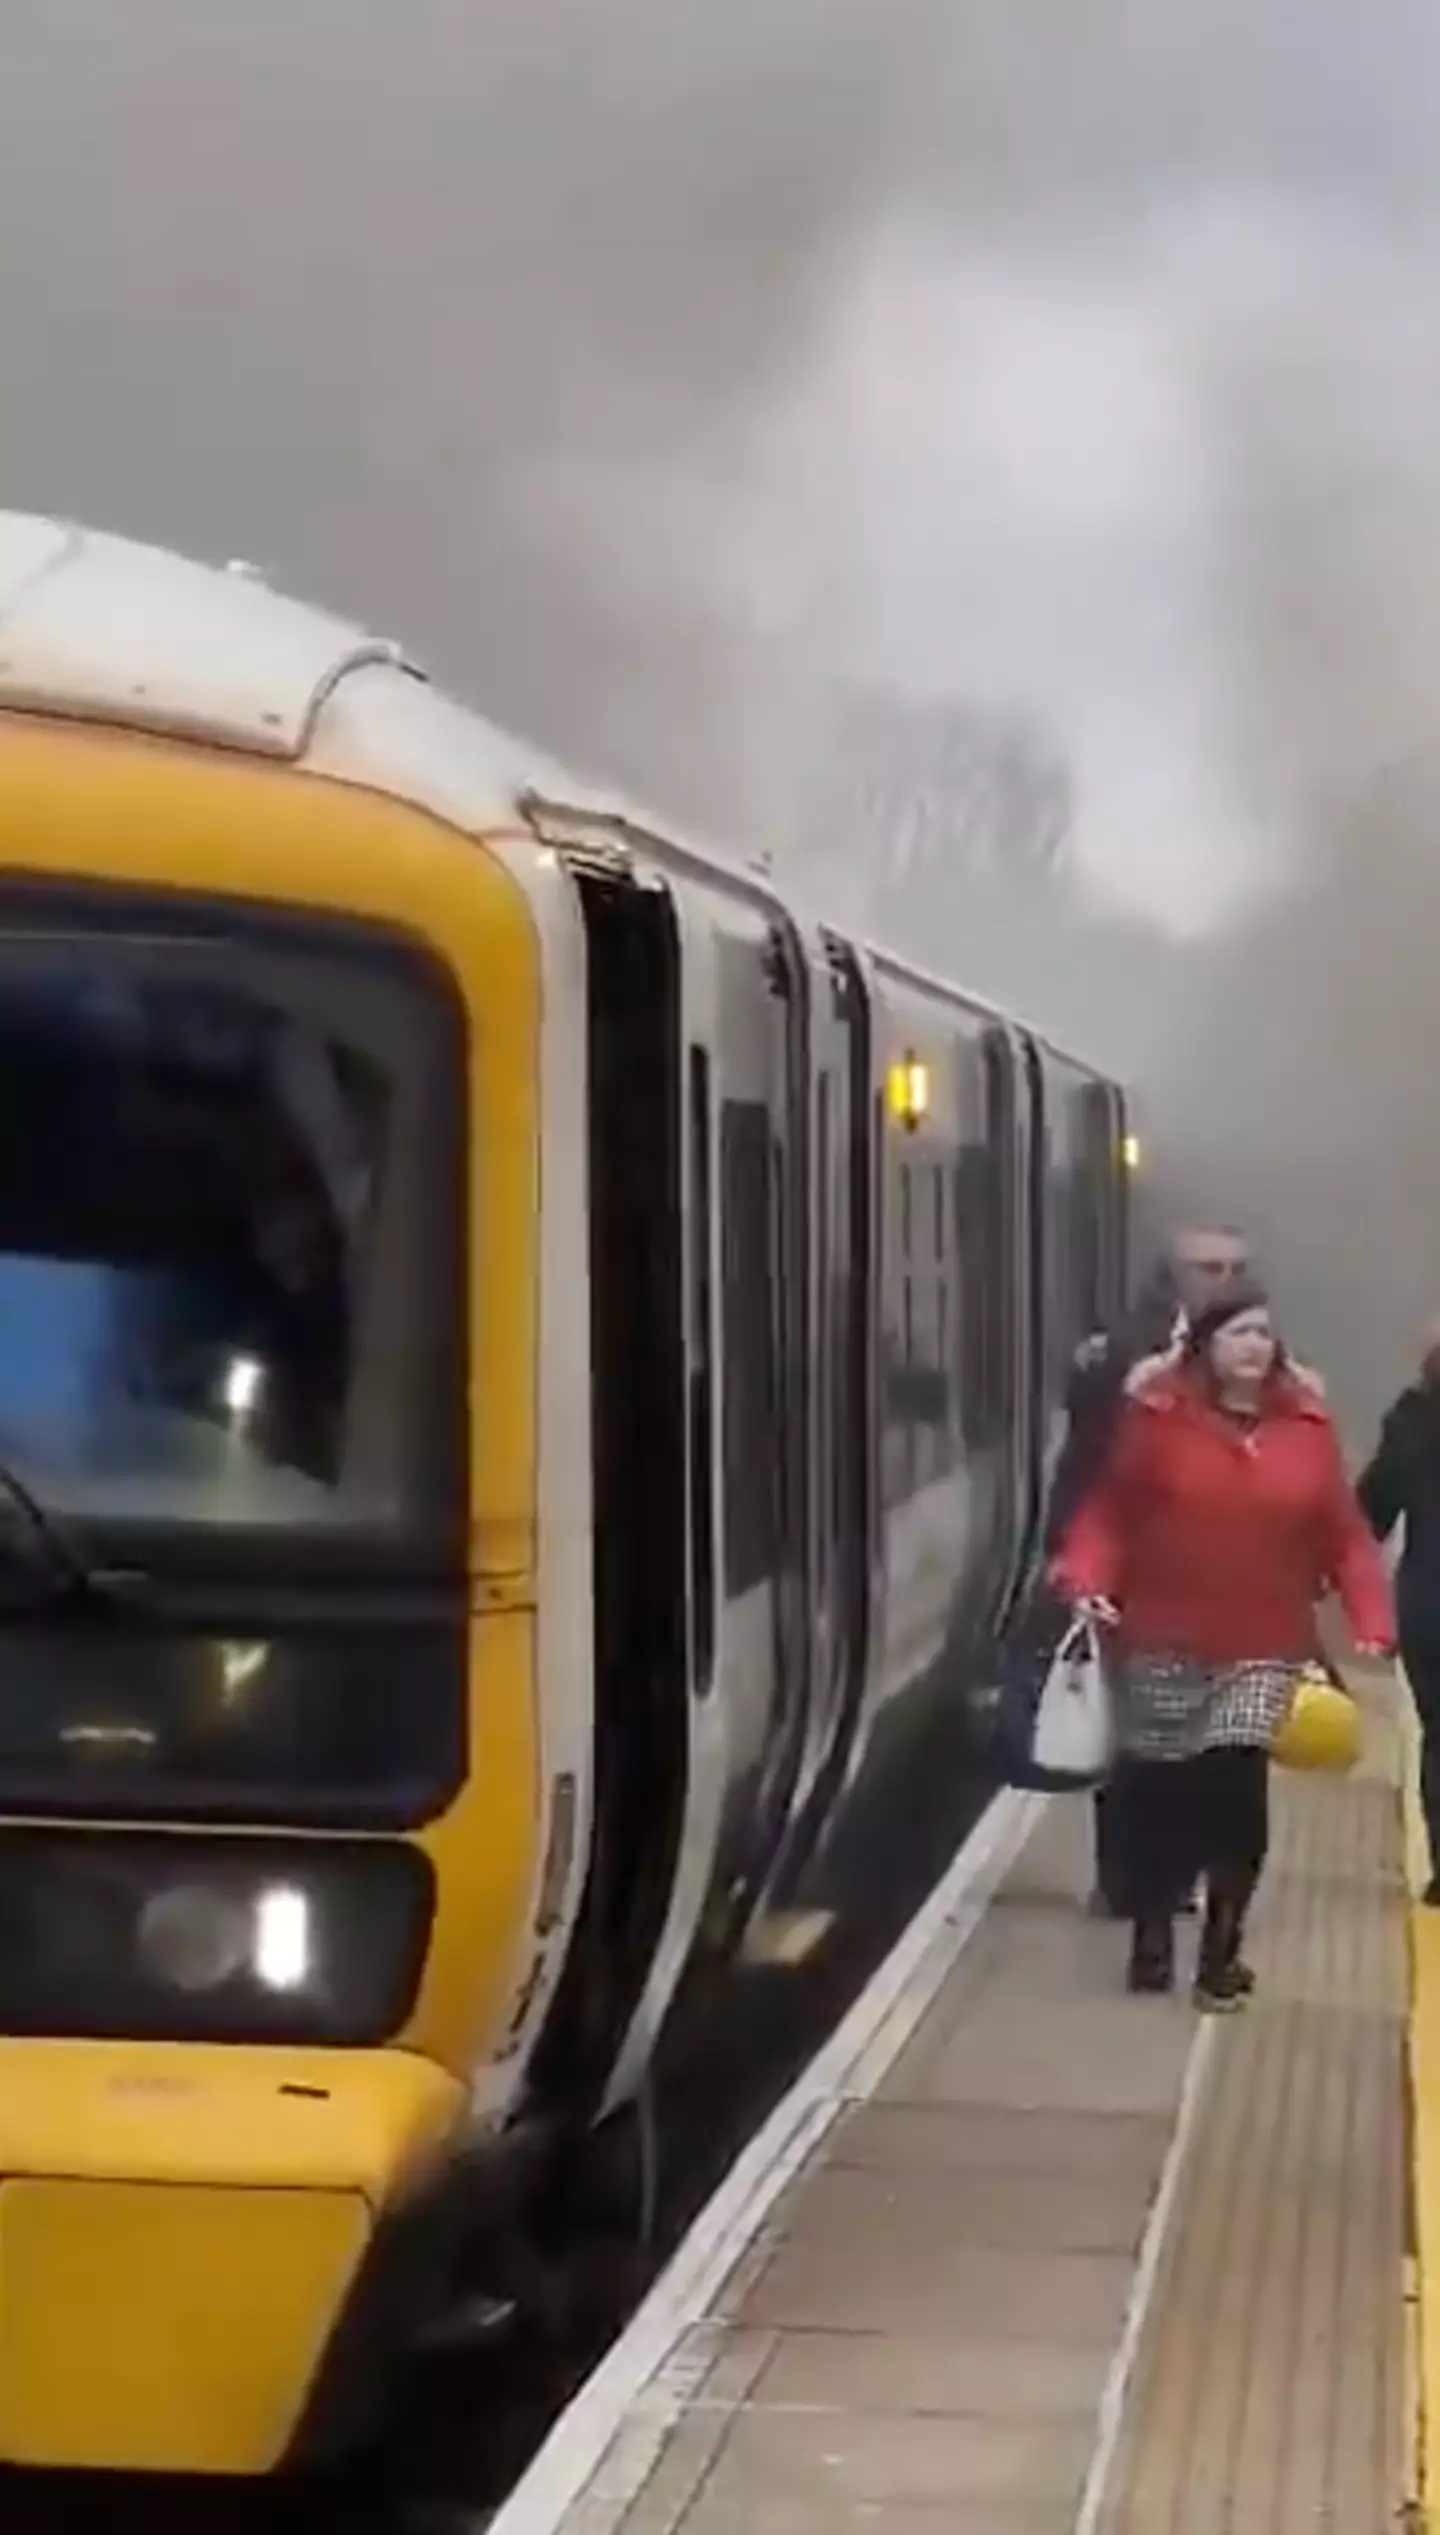 Passengers could be seen running from the blaze.